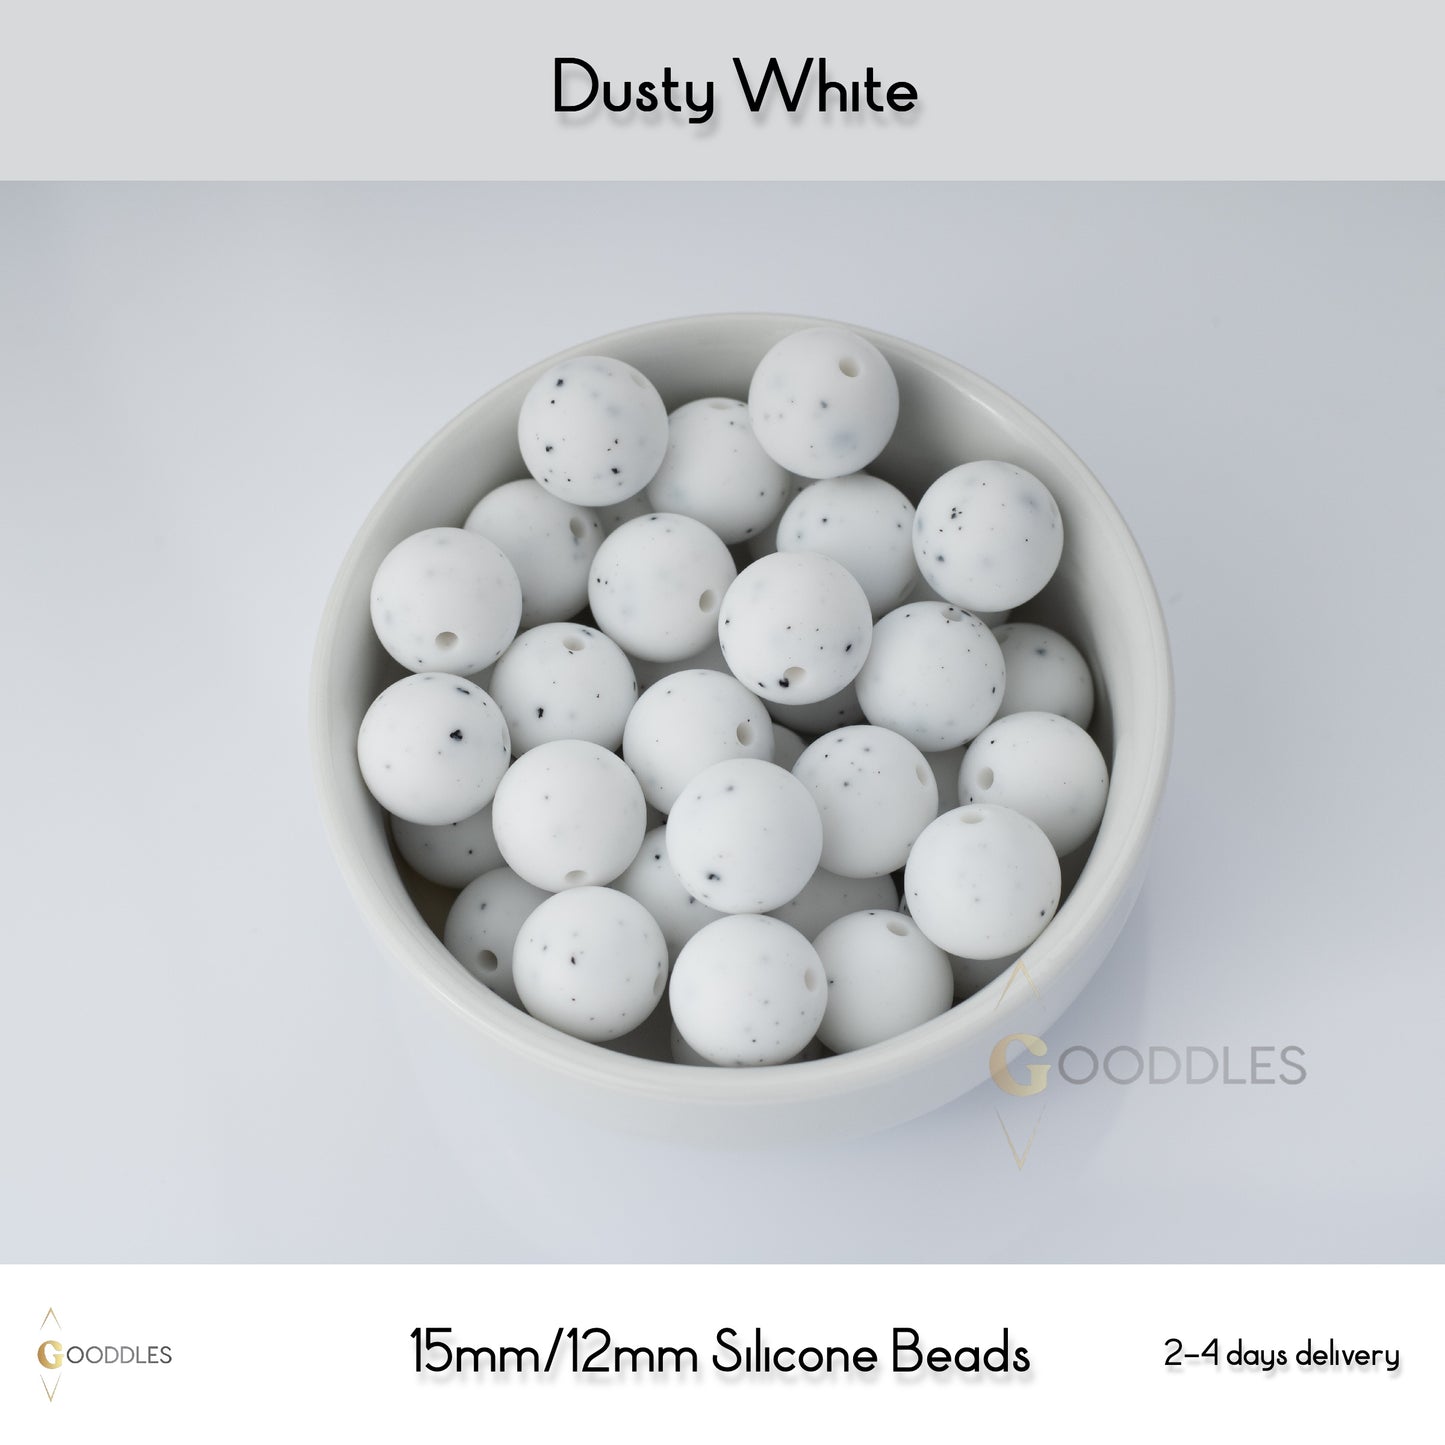 5pcs, Dusty White Silicone Beads Round Silicone Beads